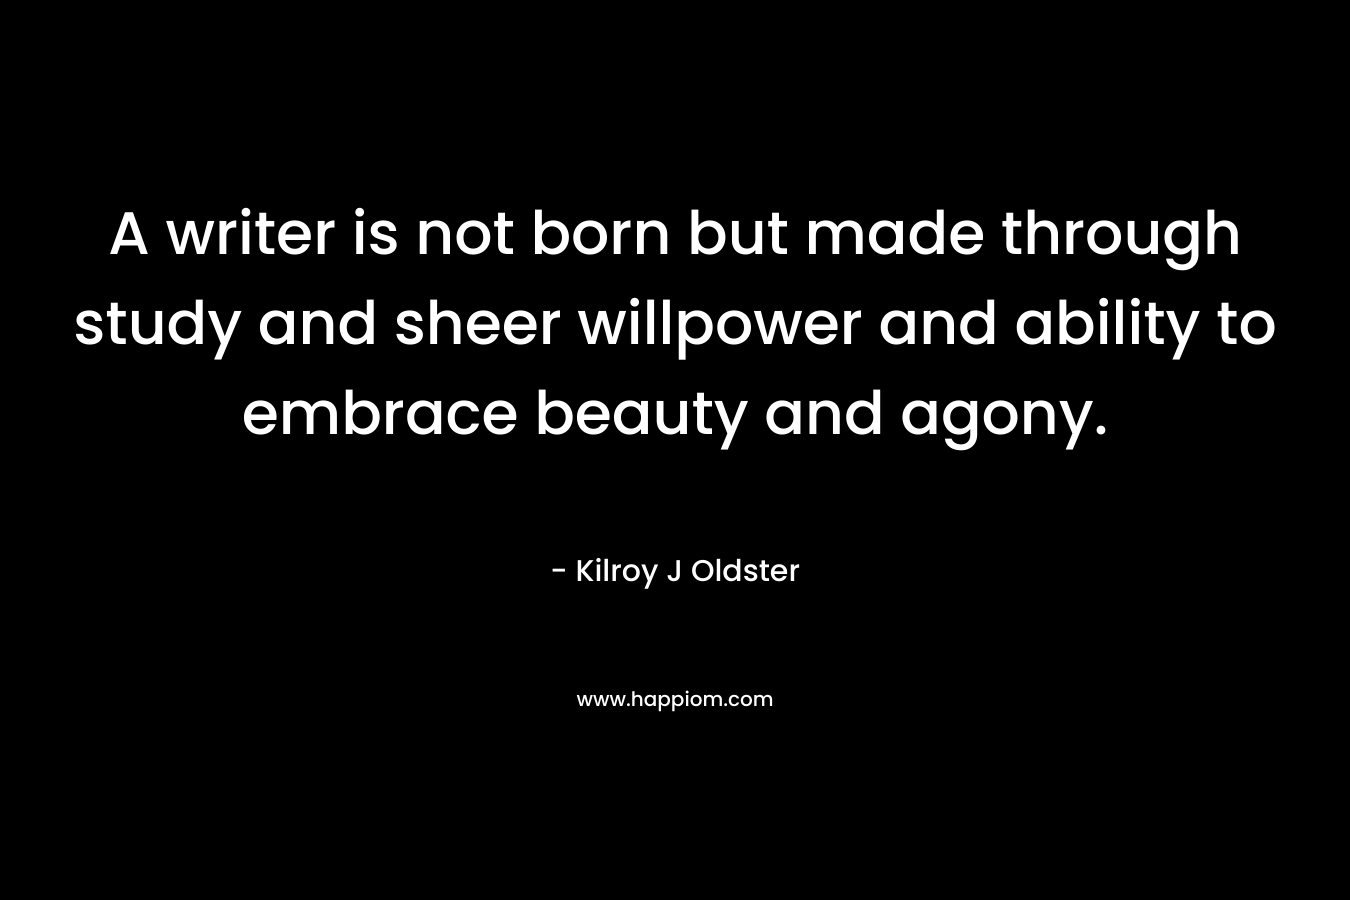 A writer is not born but made through study and sheer willpower and ability to embrace beauty and agony.